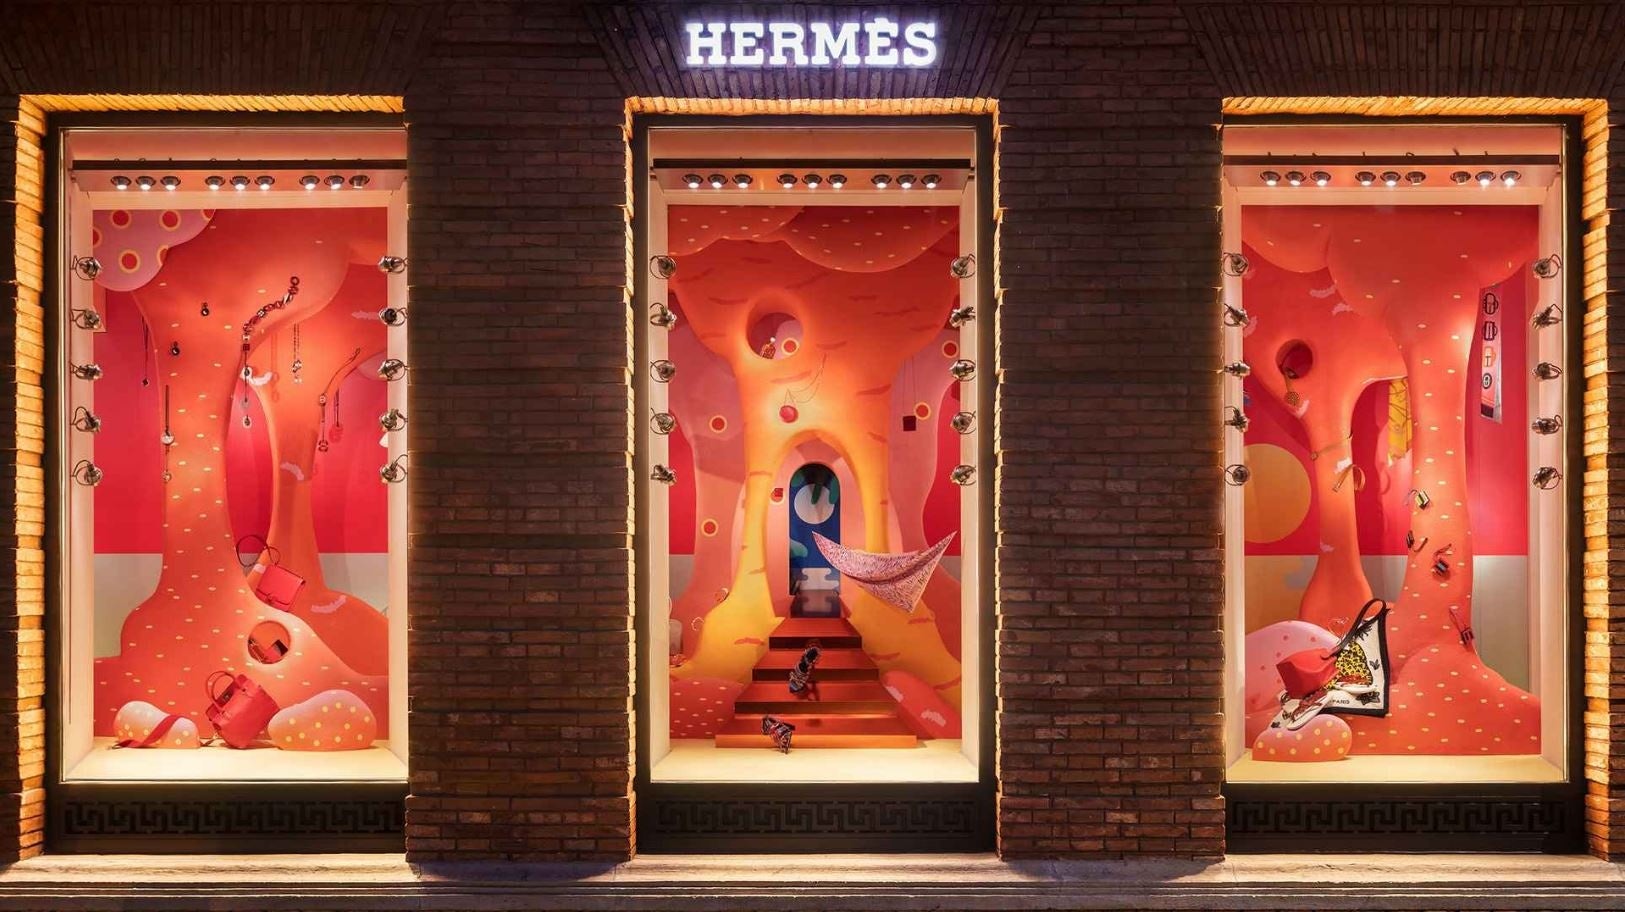 The brand's history provides insight into how Hermès has managed to become more successful than other luxury brands in China. Photo: Hermès' official website